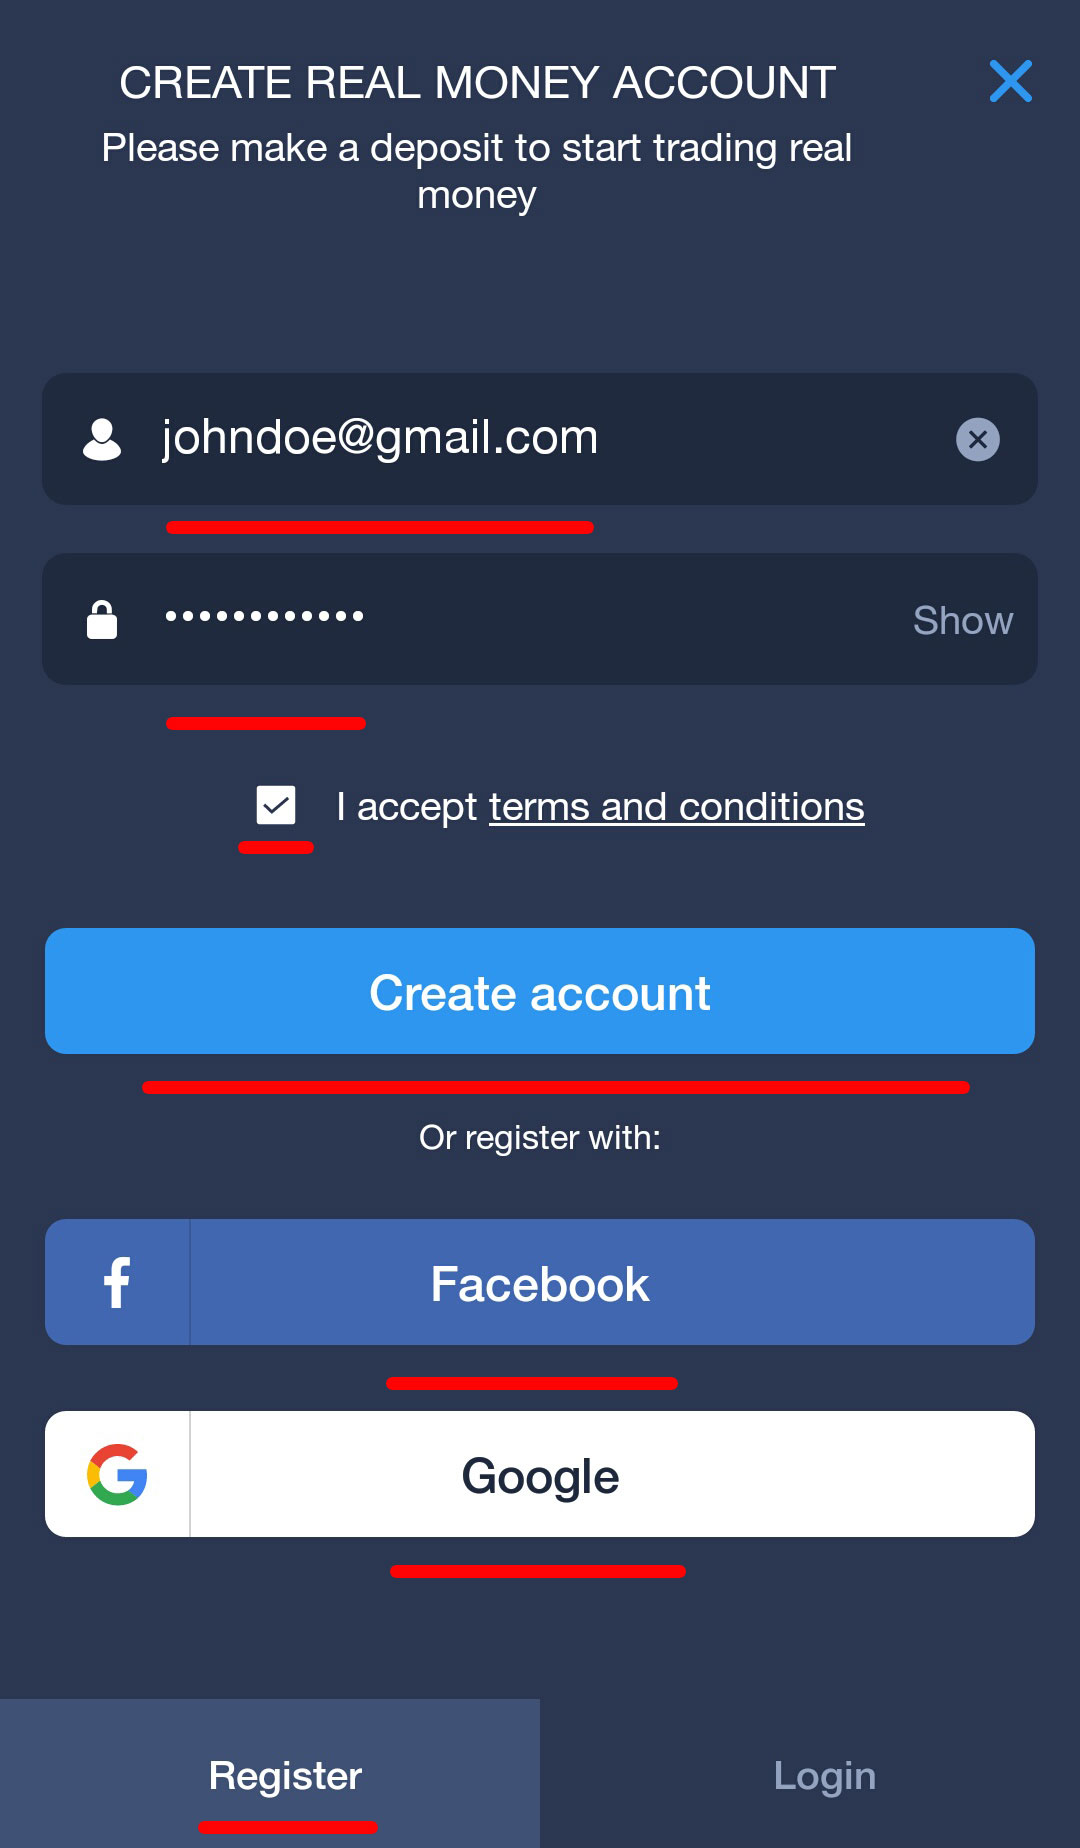 Create an account in the app